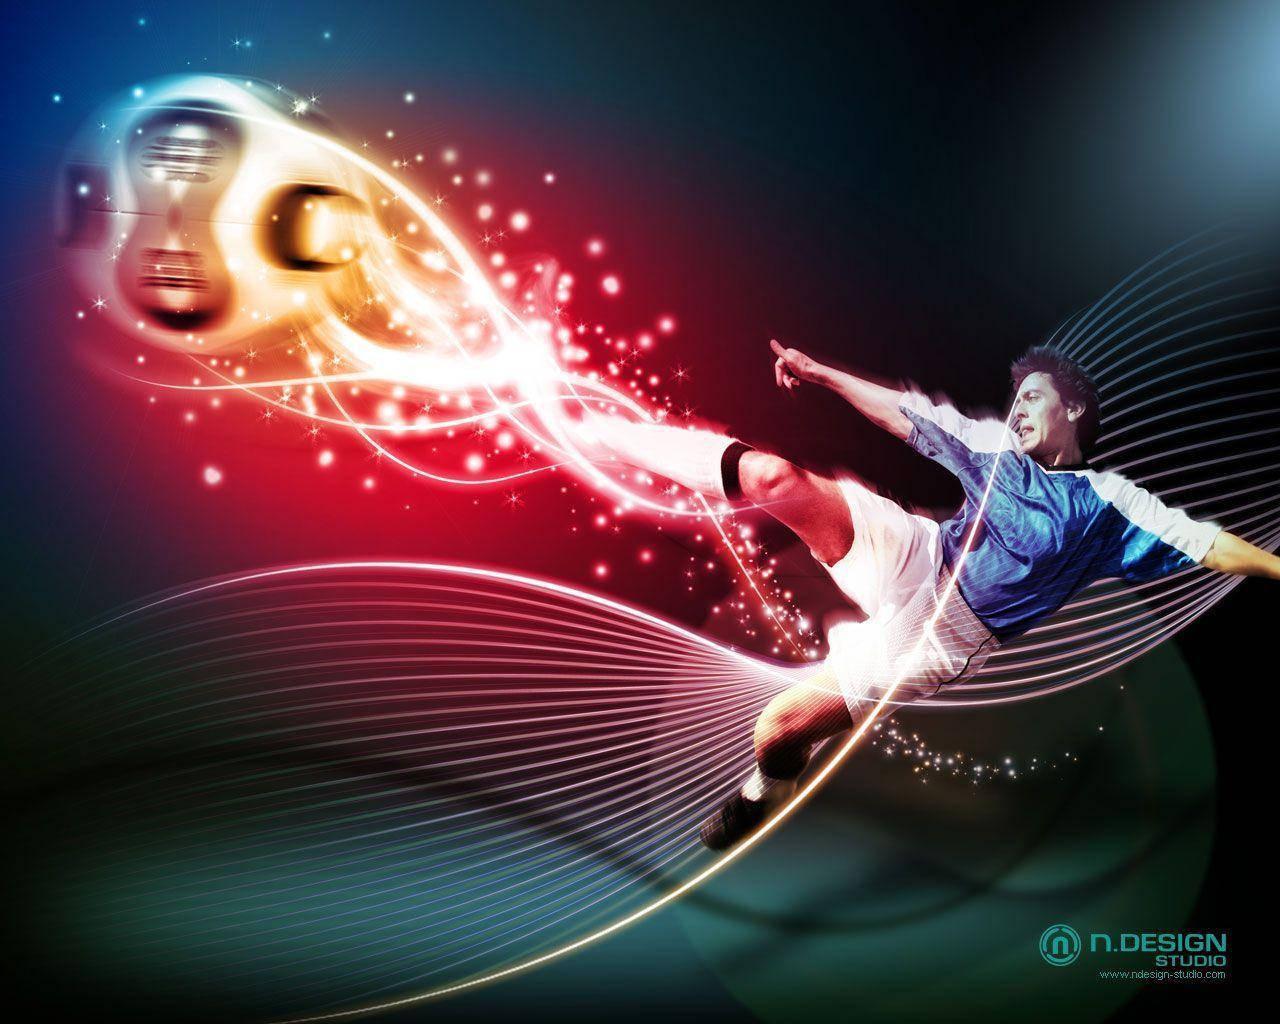 Cool Football Player High Kick Poster Background